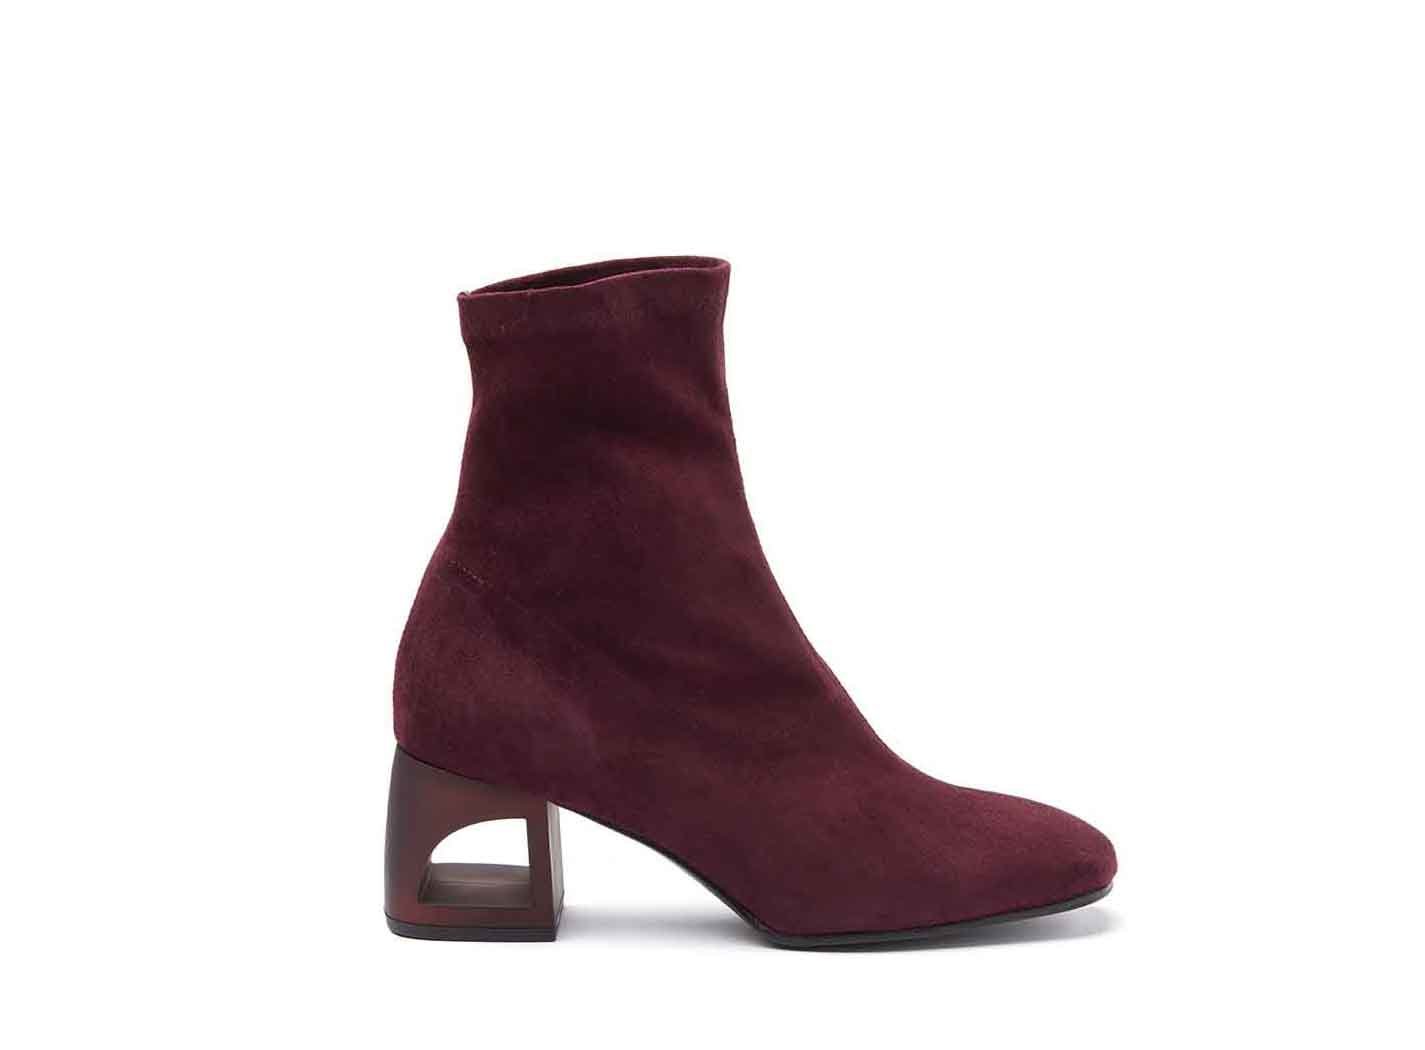 Burgundy suede heeled ankle boots